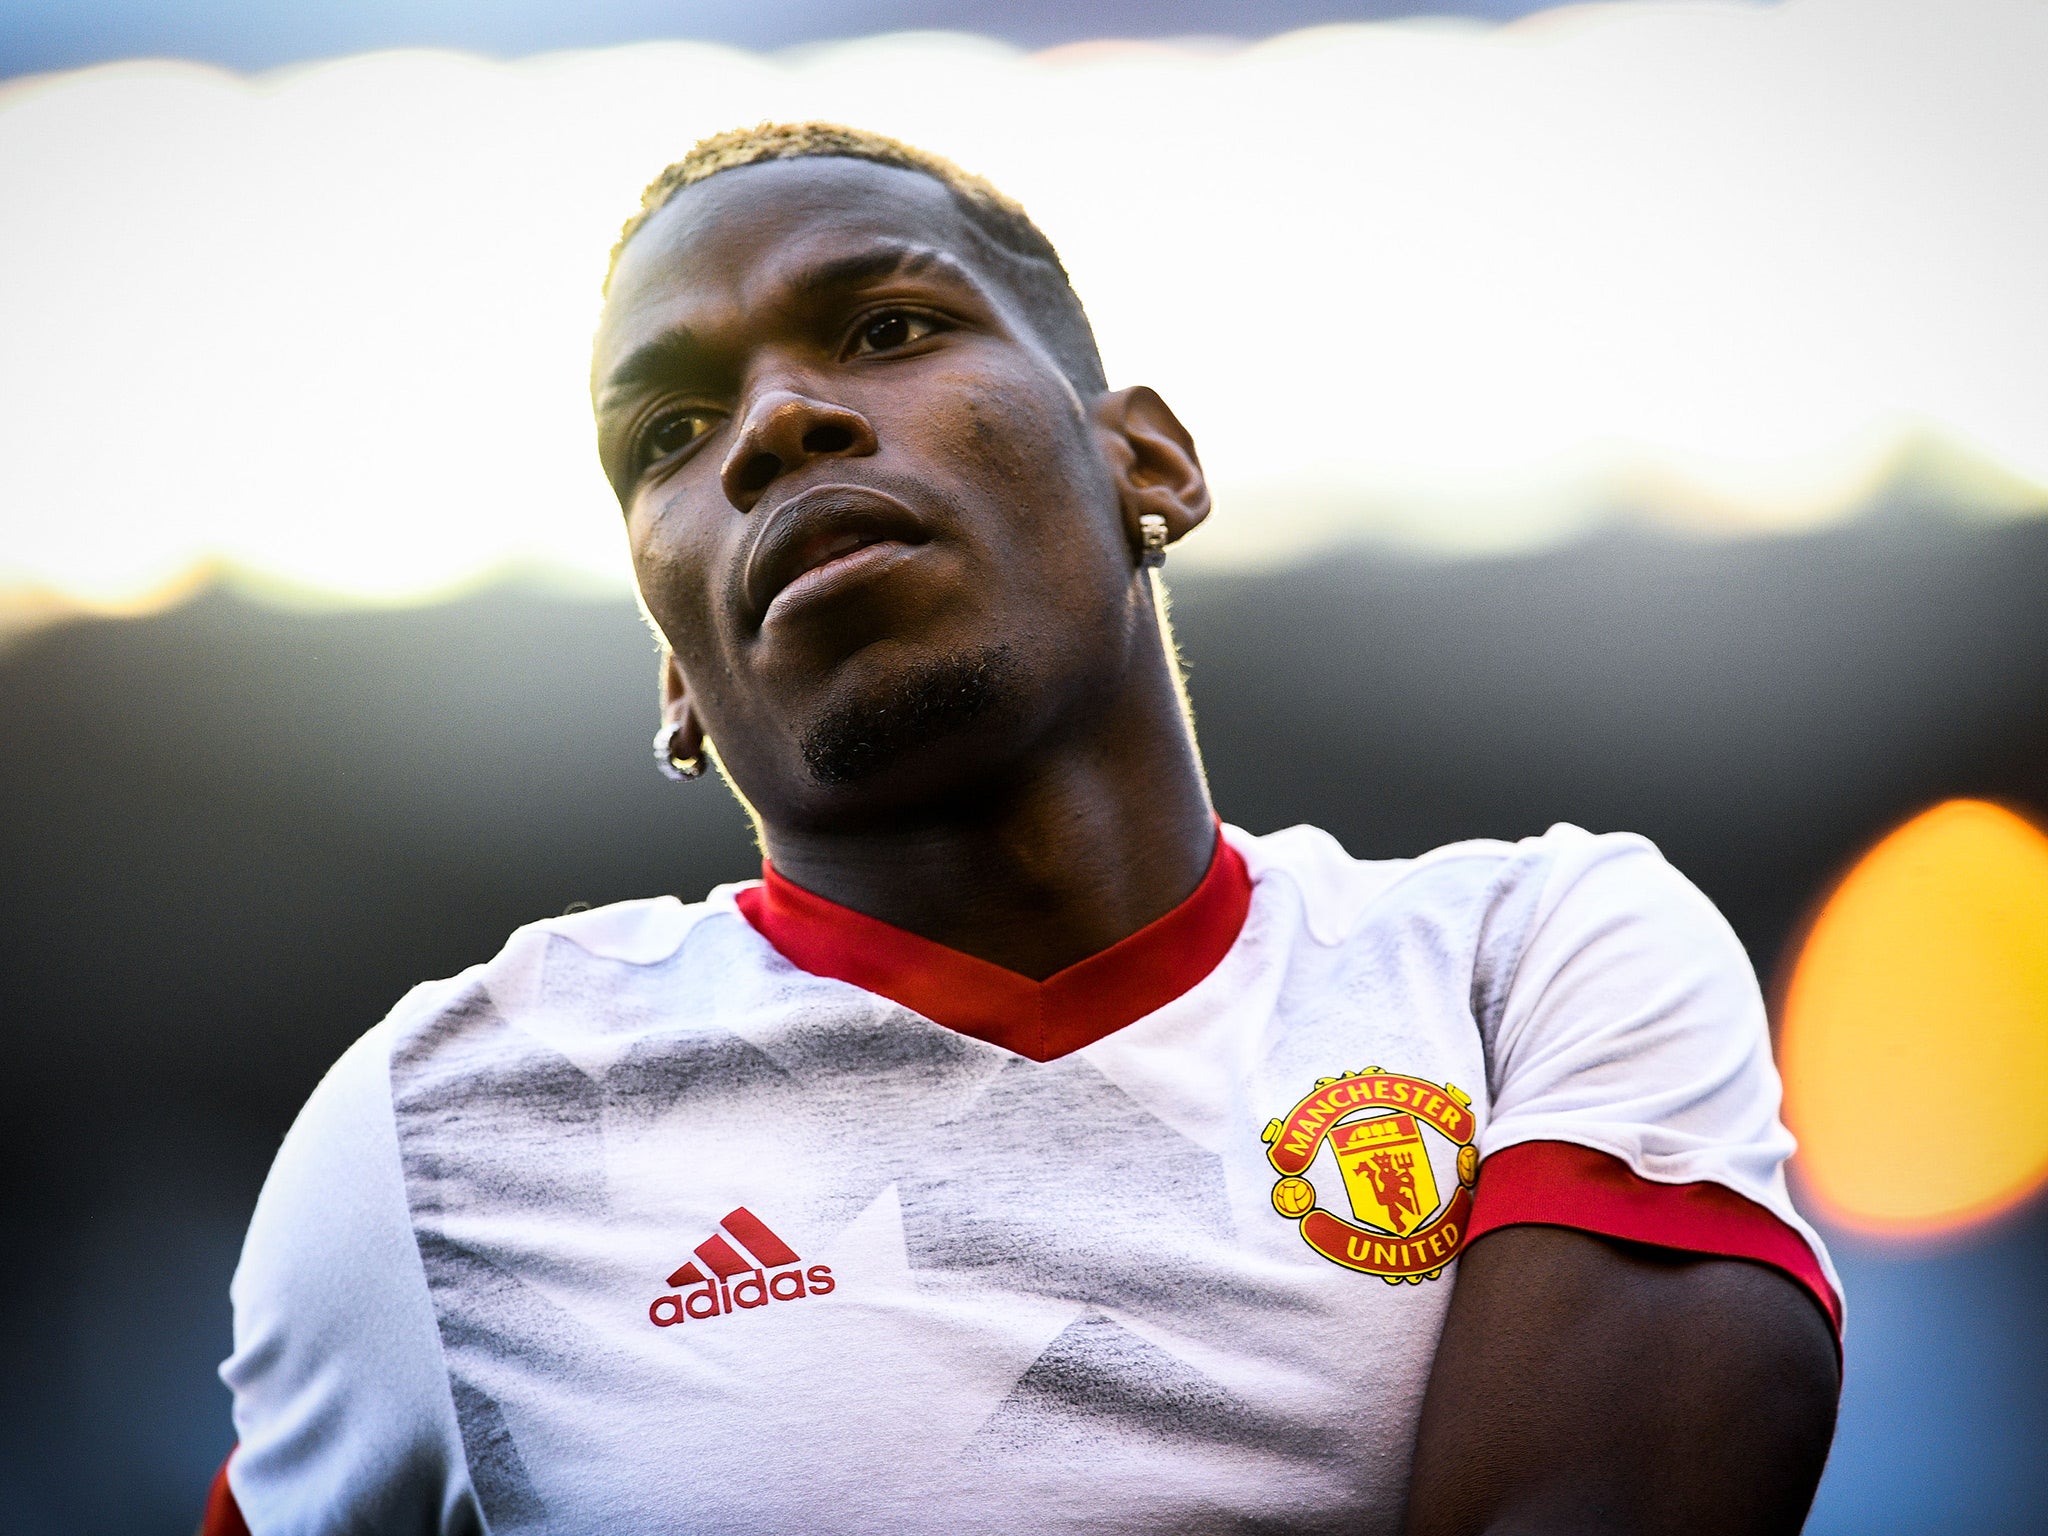 Paul Pogba became the world's most expensive footballer after moving to Manchester United